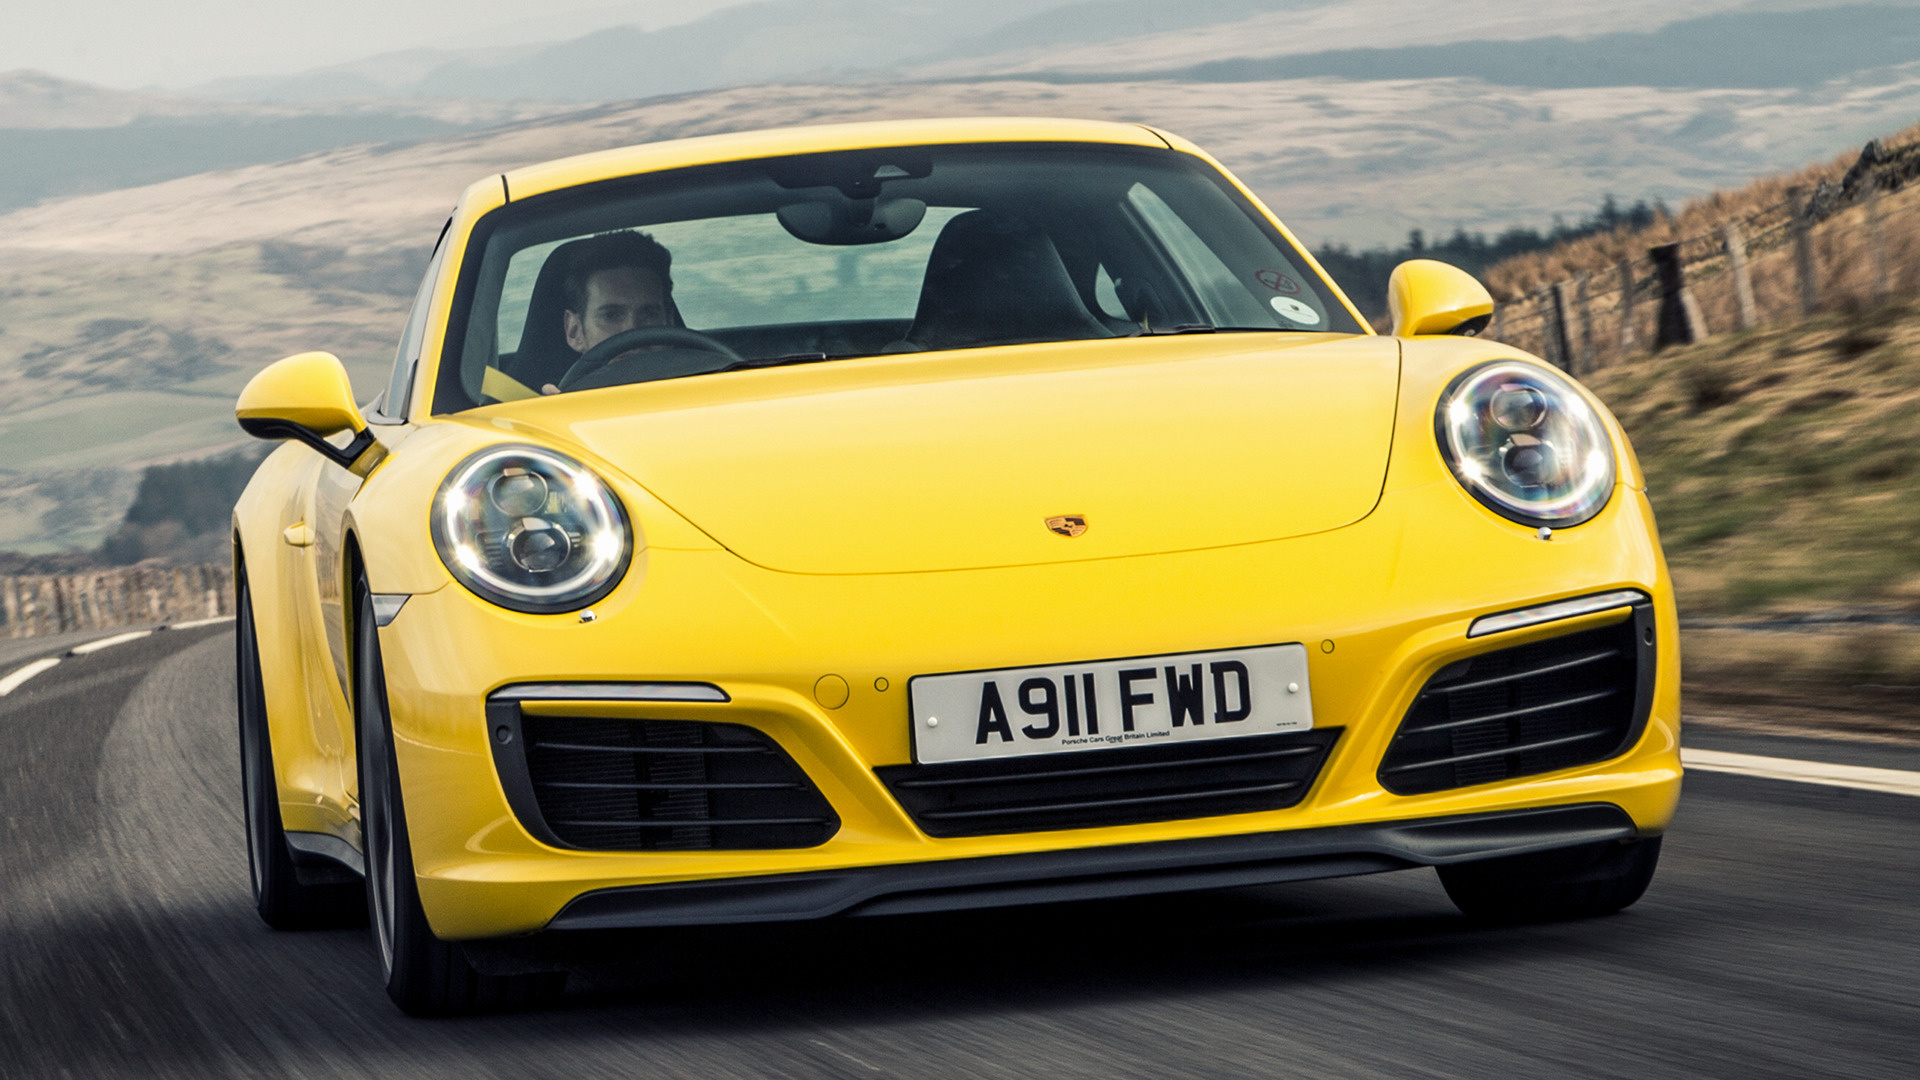 2015 Porsche 911 Carrera S Uk Wallpapers And Hd Images